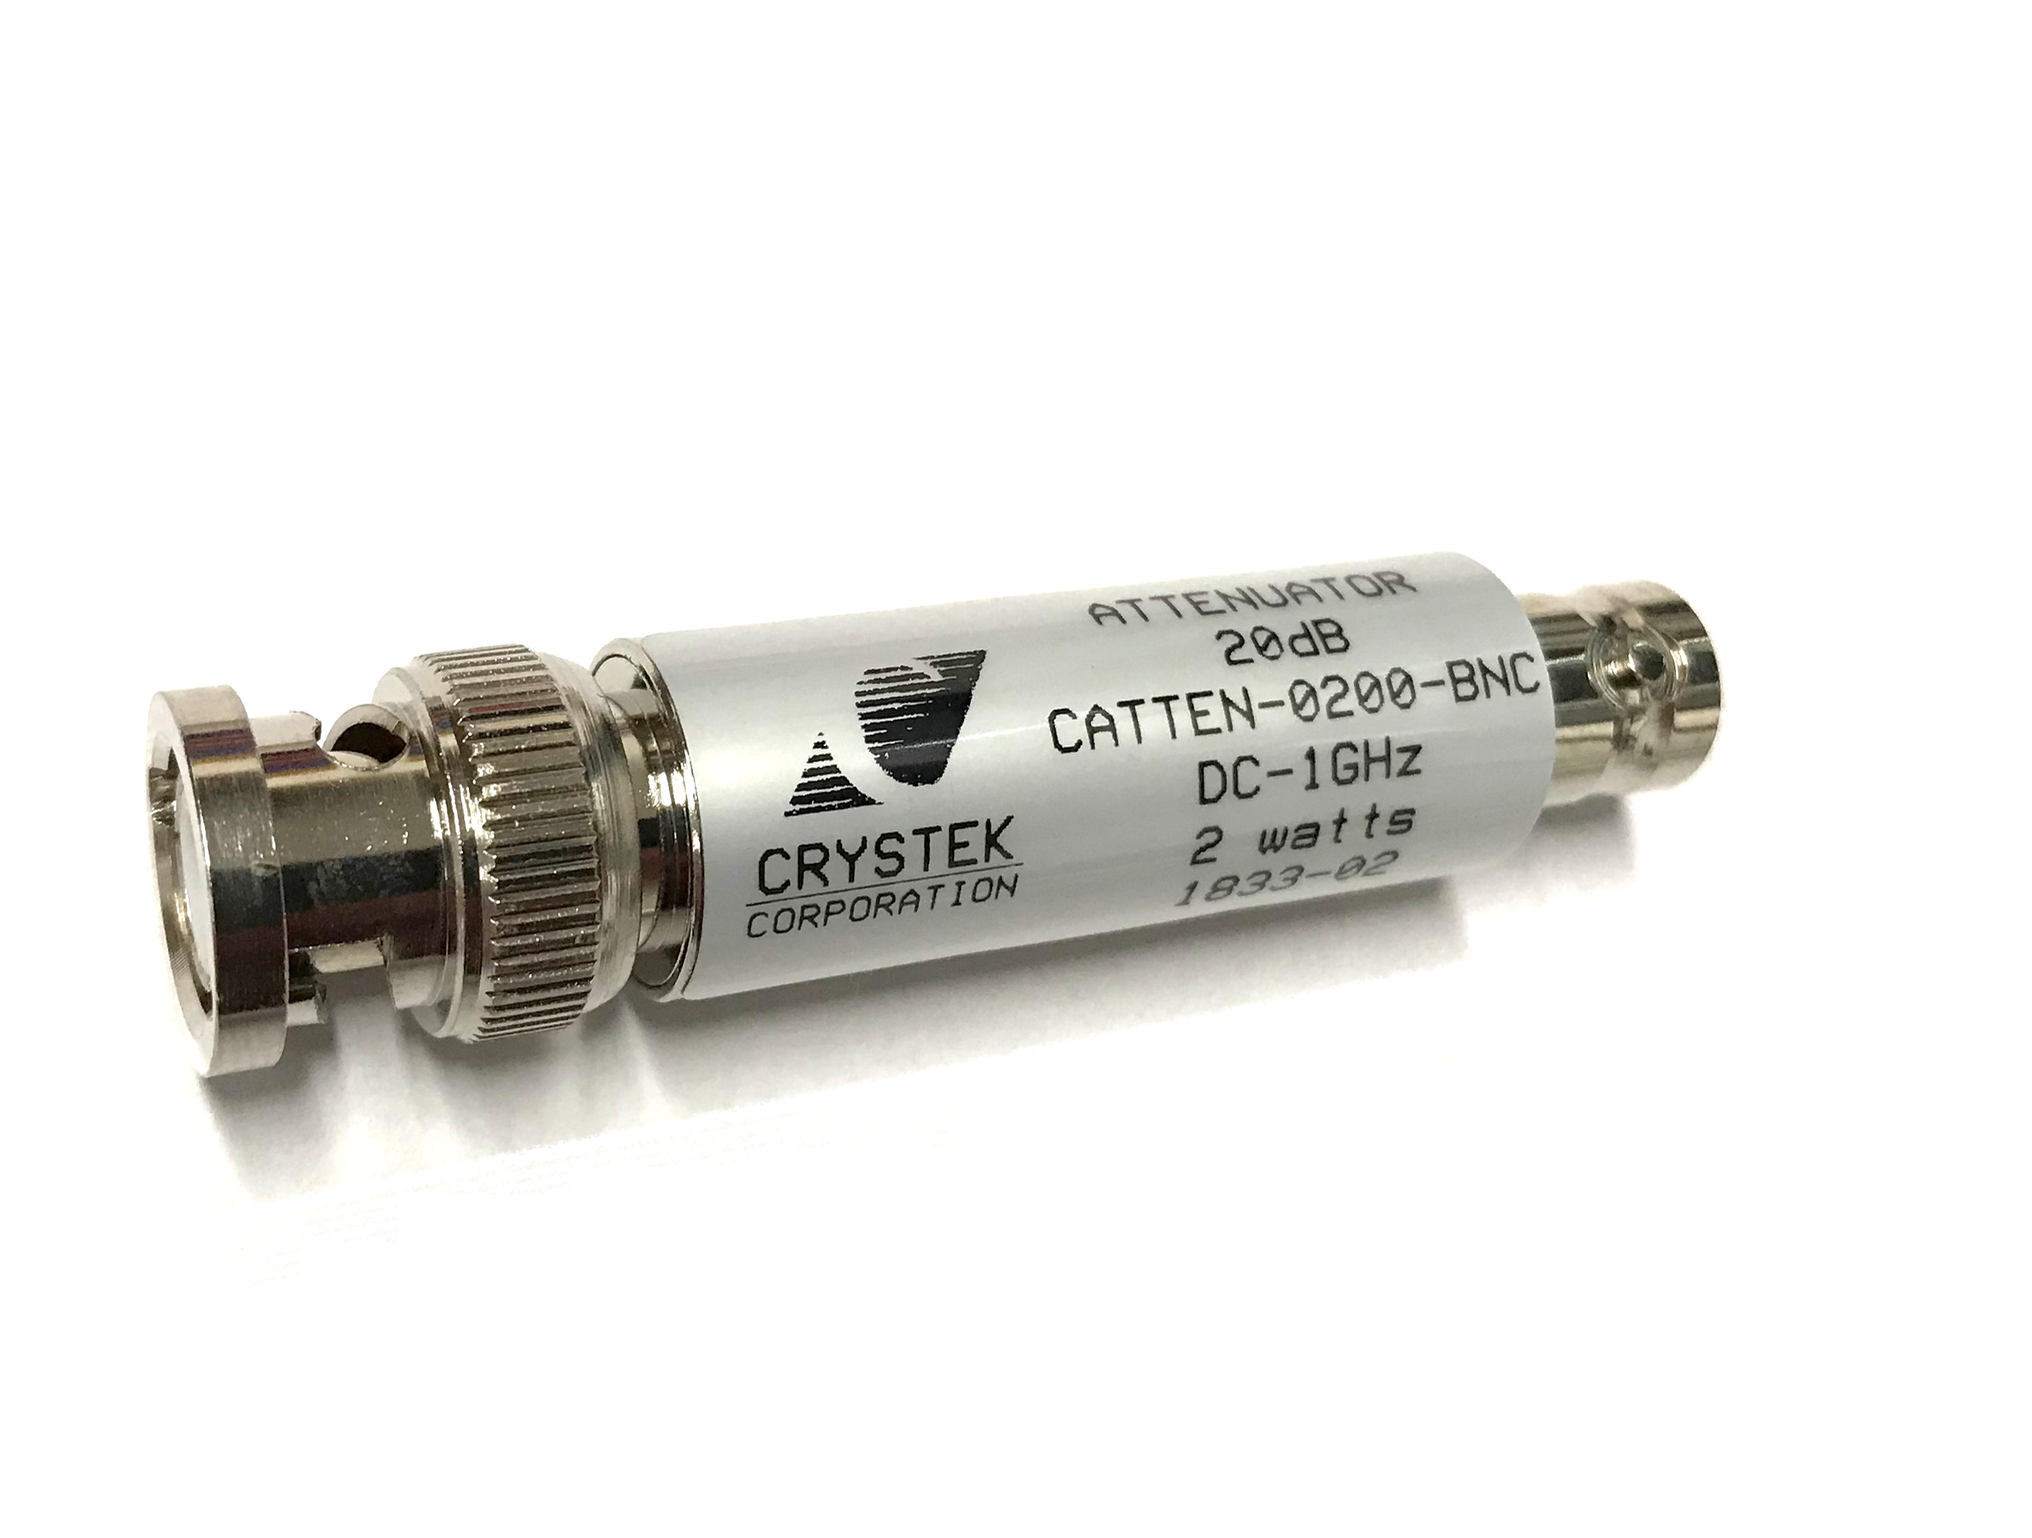 1 dB Coaxial Attenuator Trilithic BNC 75 Ohm DC to 1 GHz Texscan FP-75 